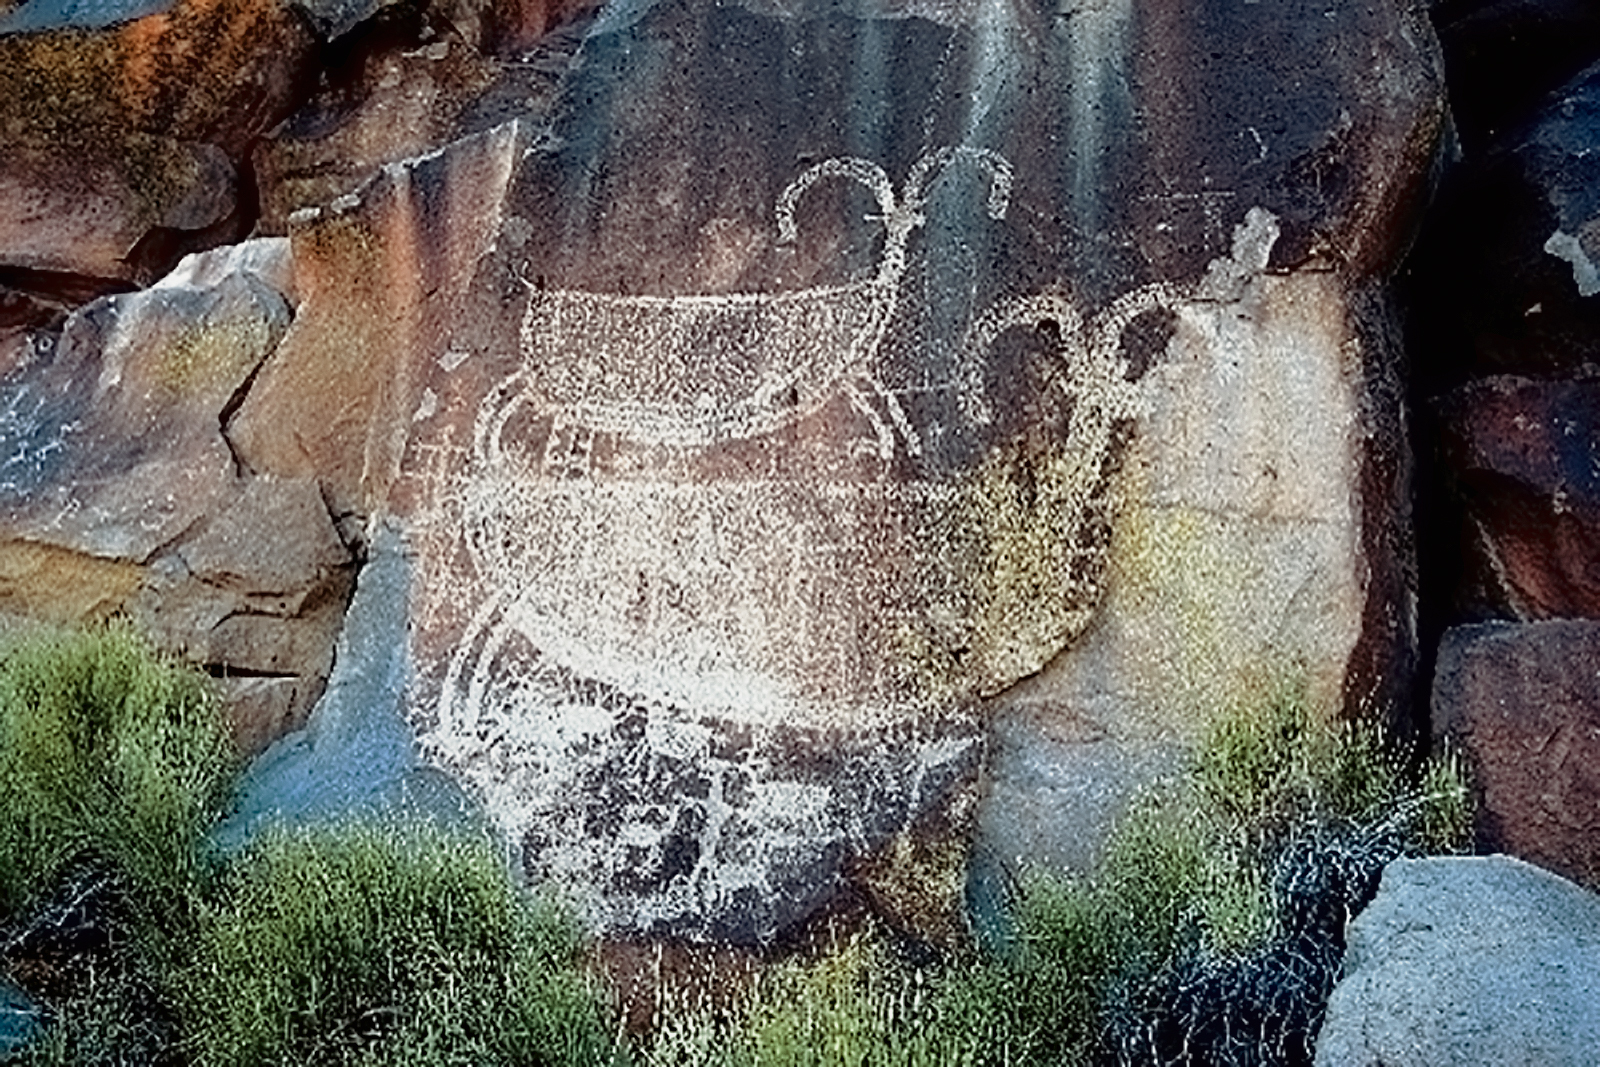 The larger of these two bighorn sheep in Petroglyph Canyon is greater than 7 feet from tip of horn to tip of tail